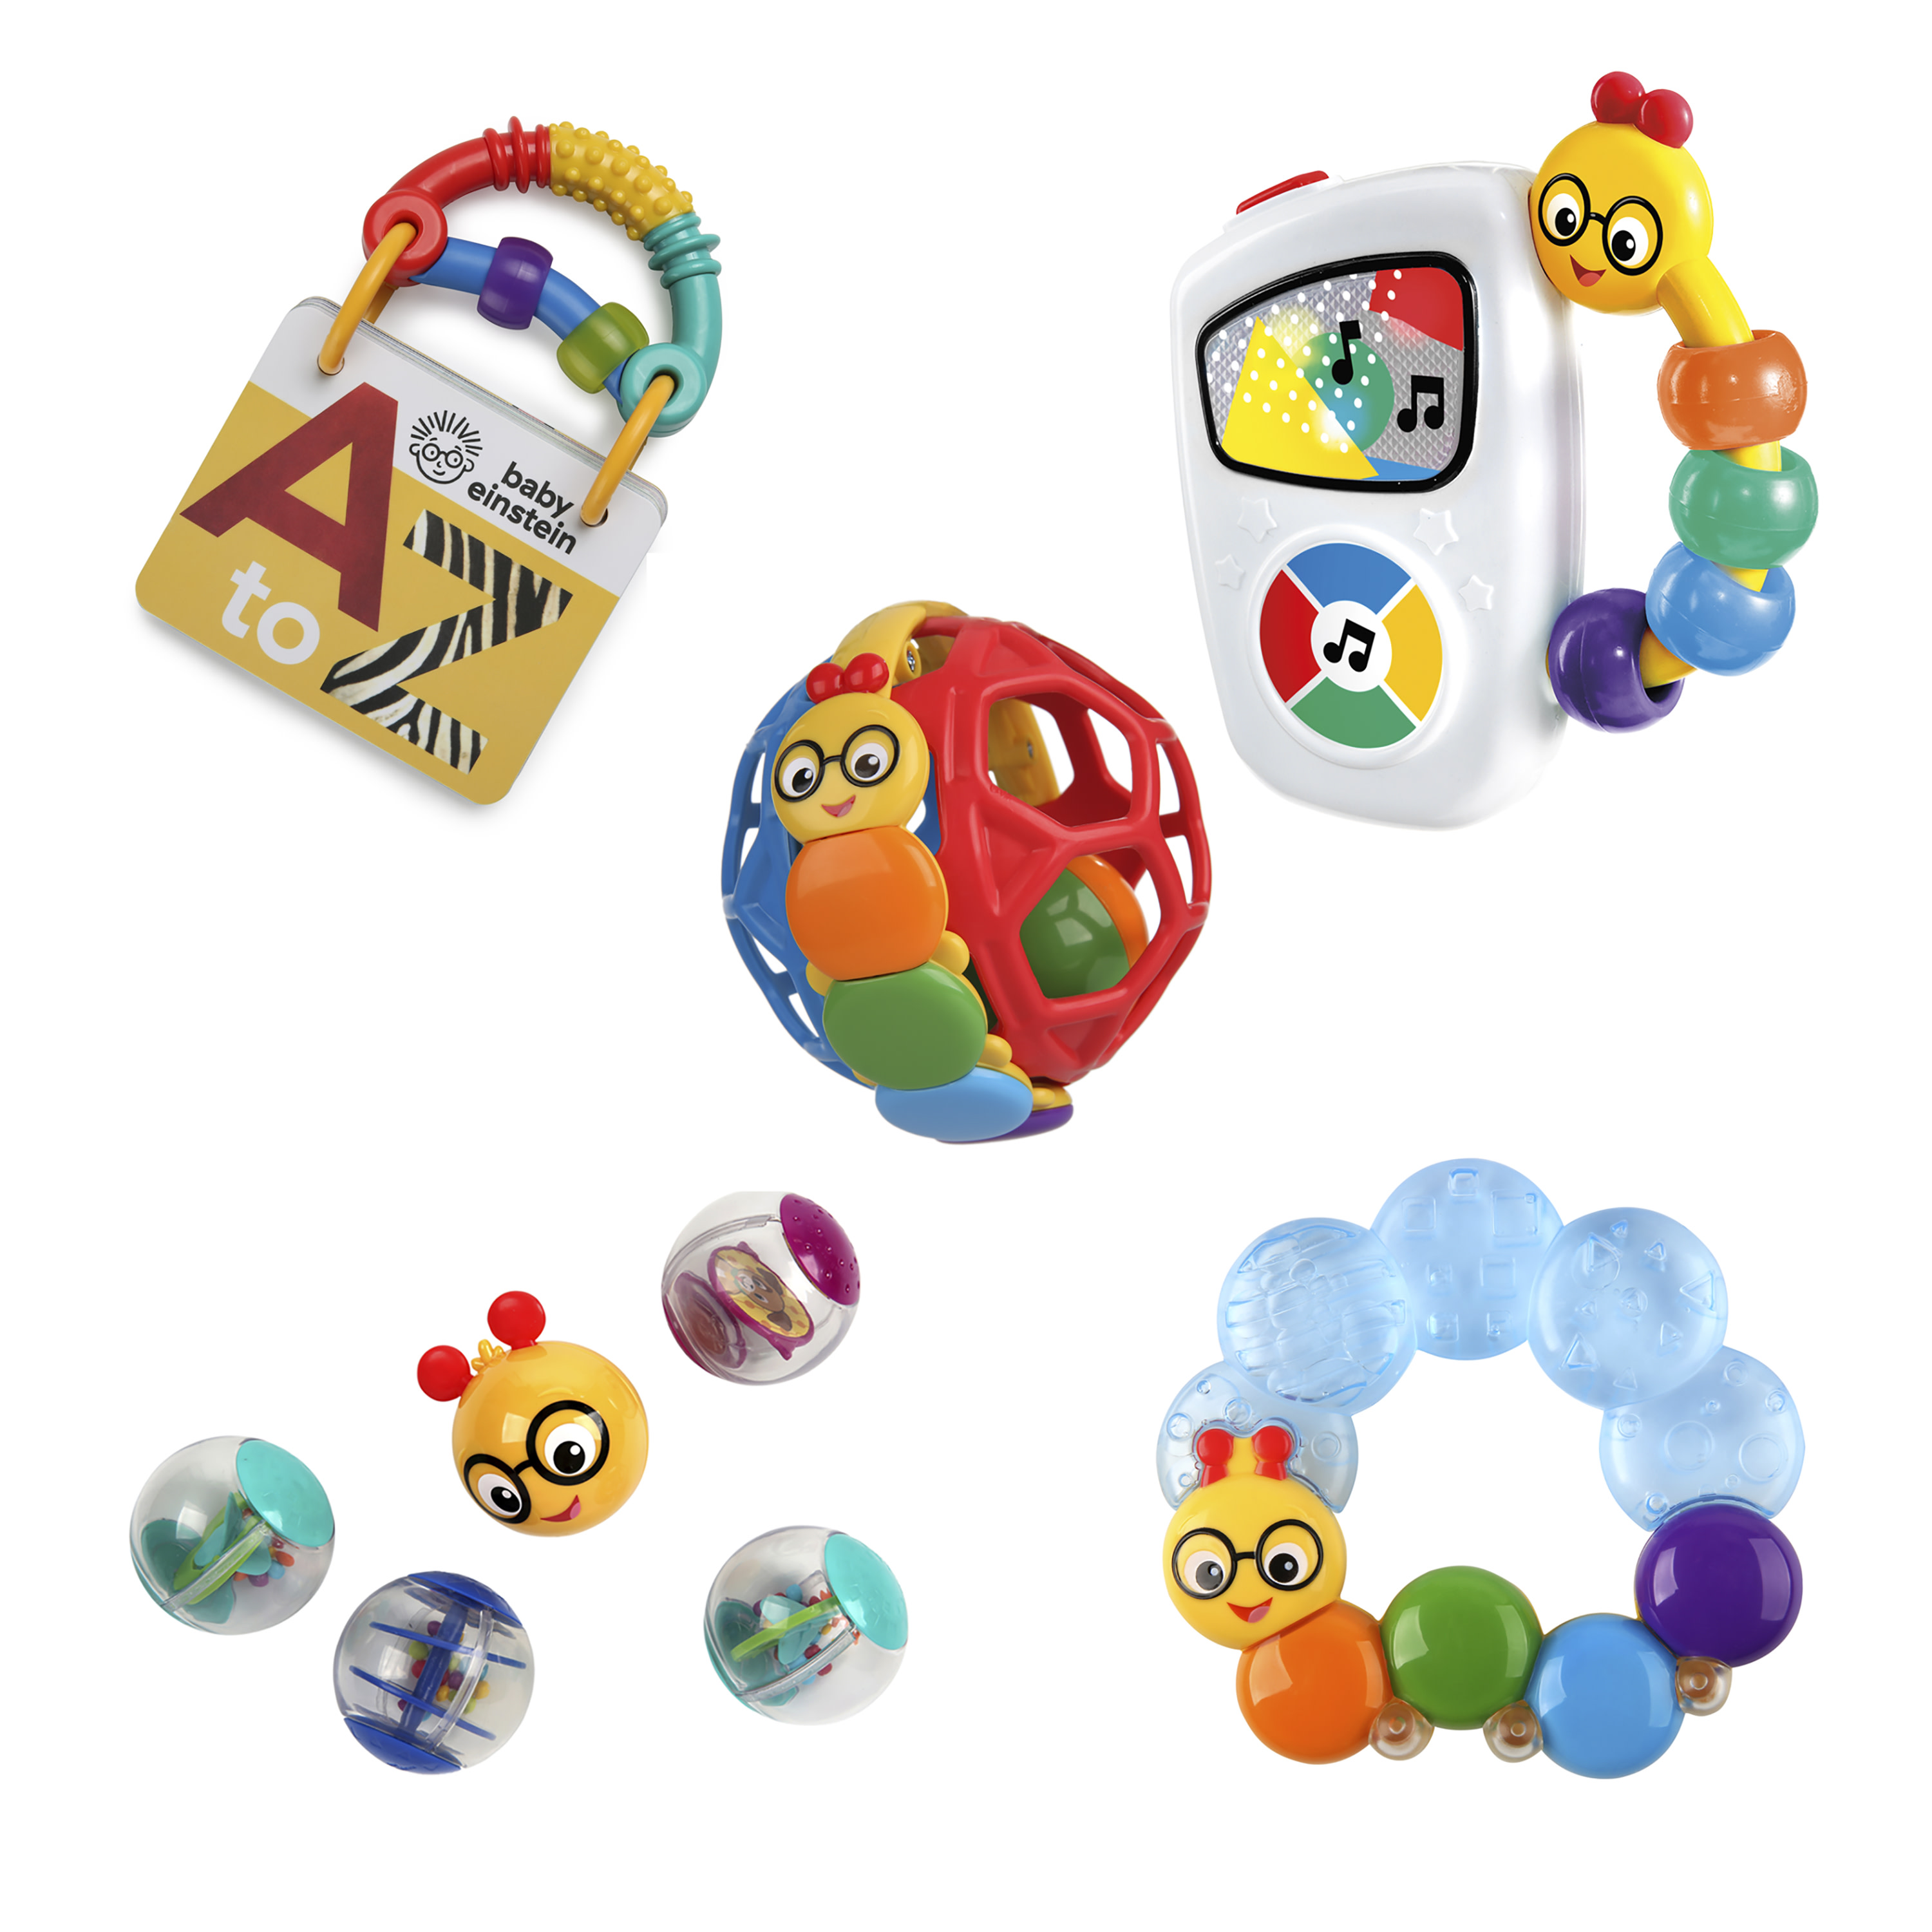 Baby Einstein Discovery Essentials Gift Pack with 5 Toys for Infants 3 Months and up - image 1 of 14